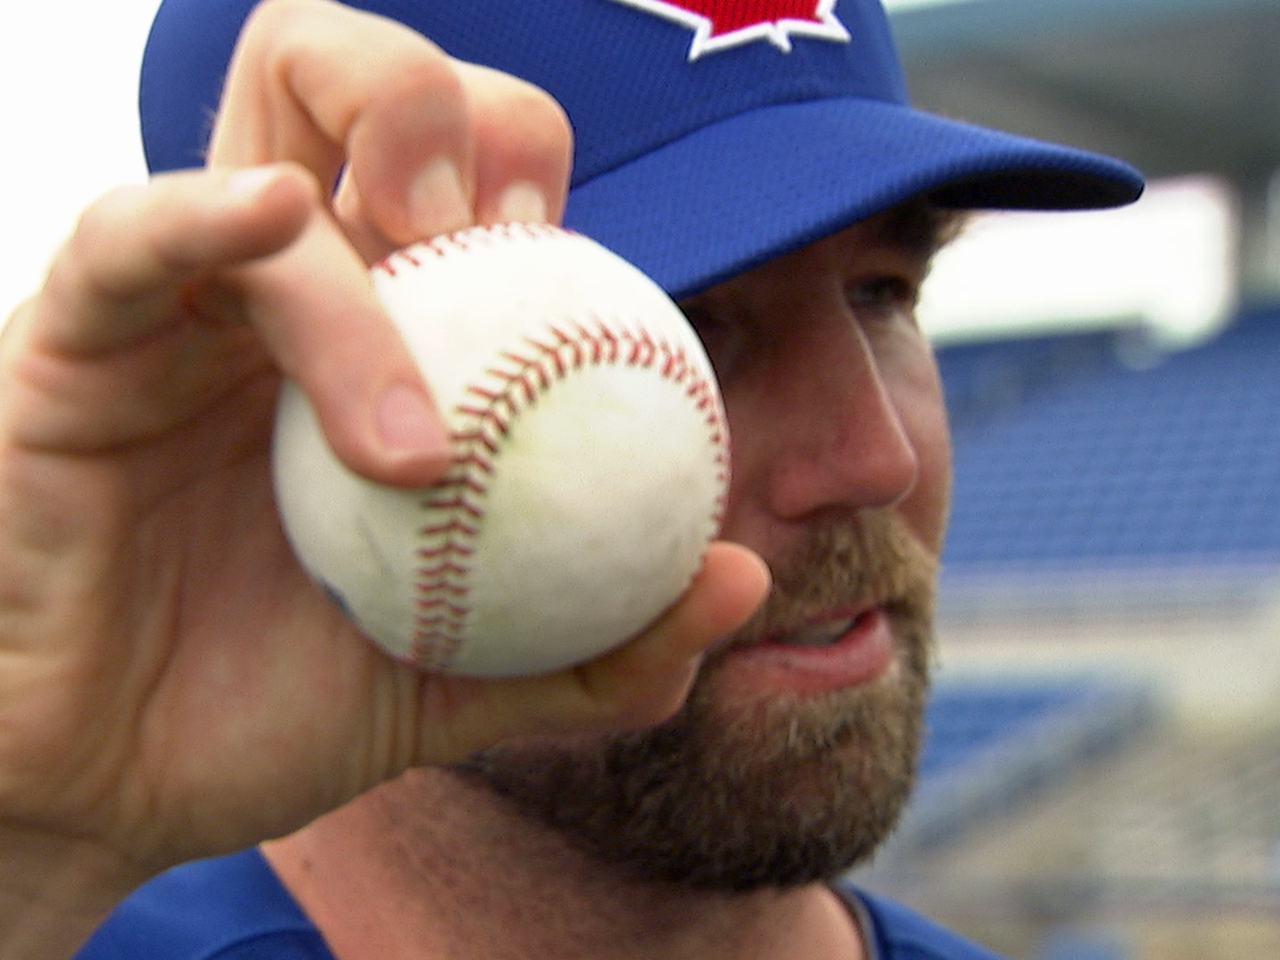 Mets pitcher R.A. Dickey and Orel Hershiser on the making of a